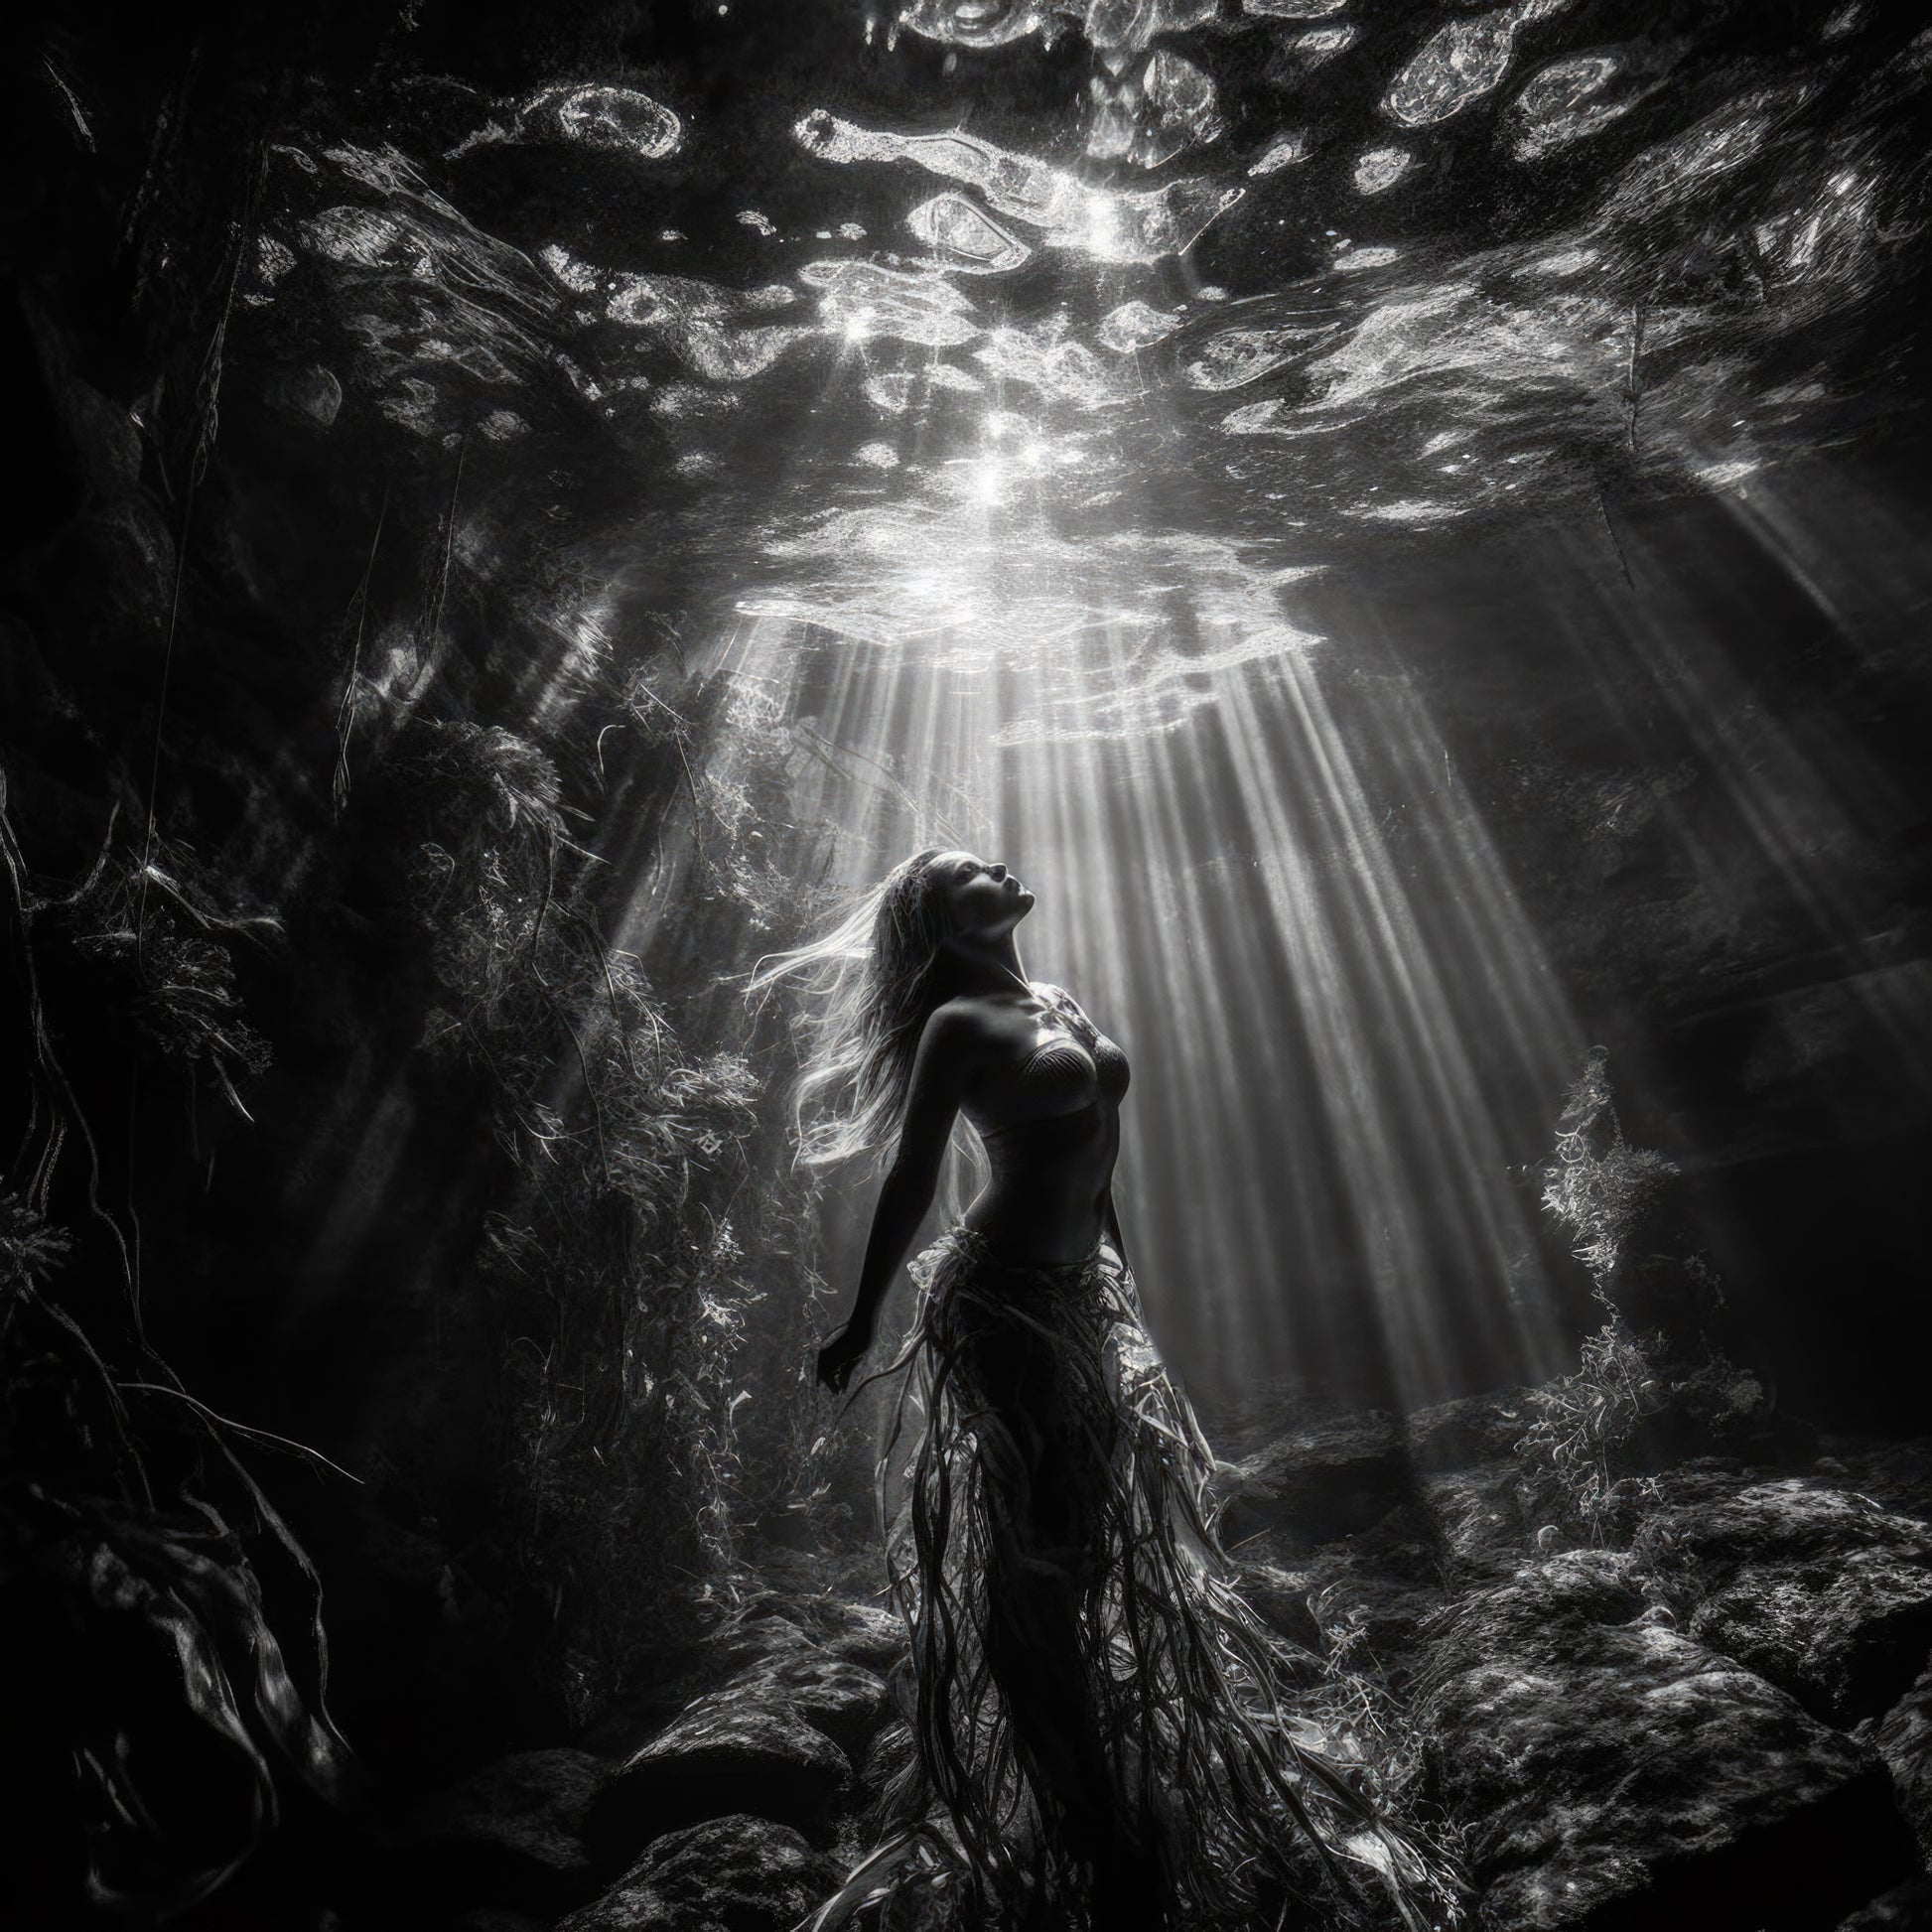 Black and white archival fine art print of a woman underwater illuminated by sunrays from the Siren Song Mermaid Collection, printed on acid-free materials.